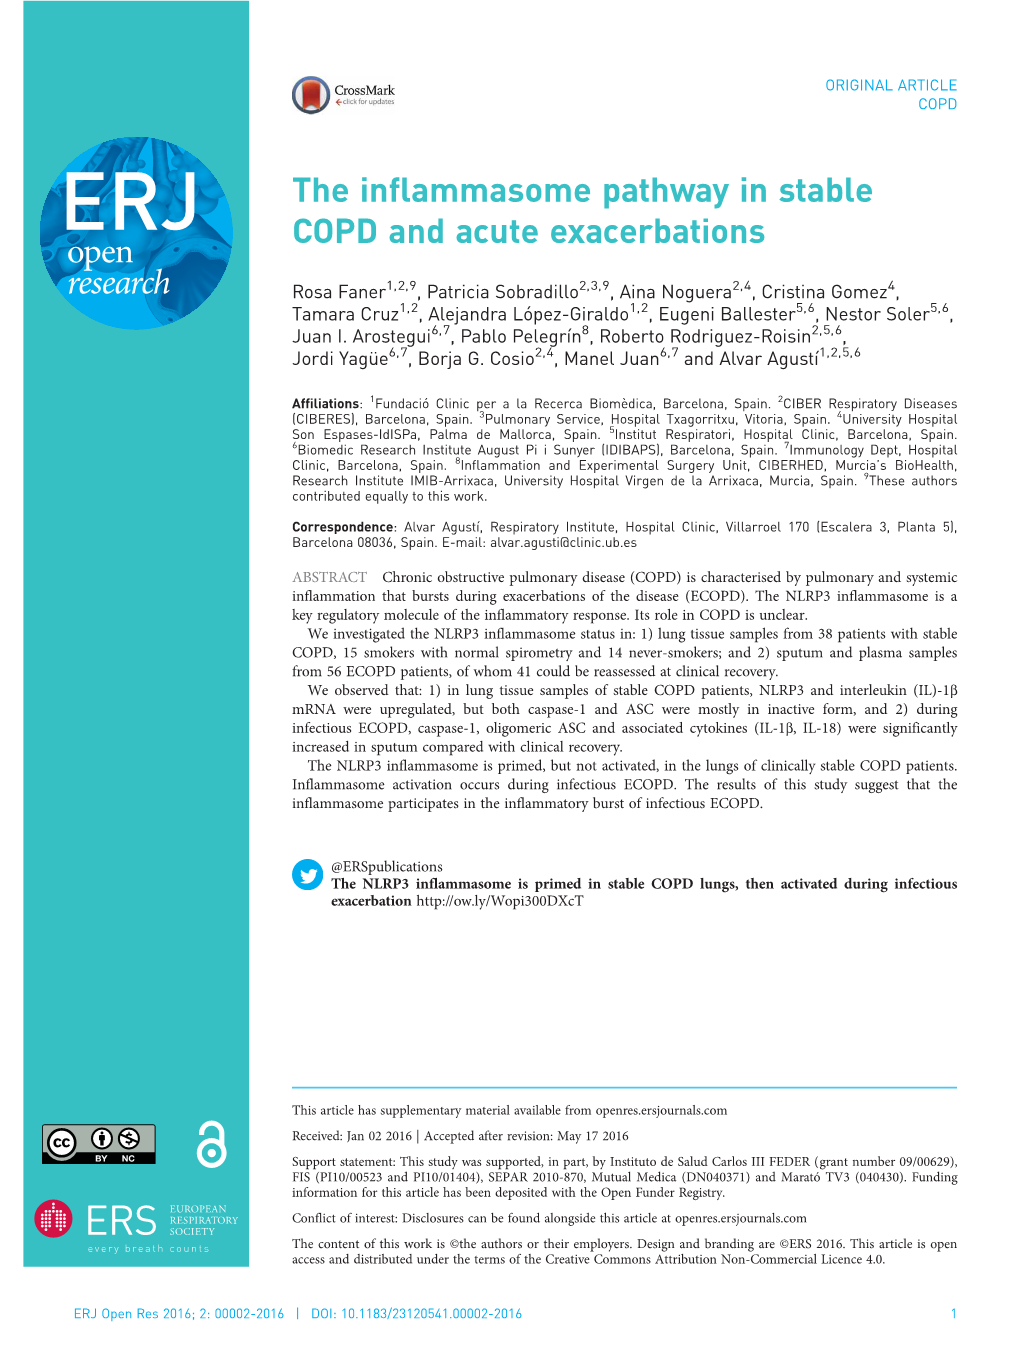 The Inflammasome Pathway in Stable COPD and Acute Exacerbations